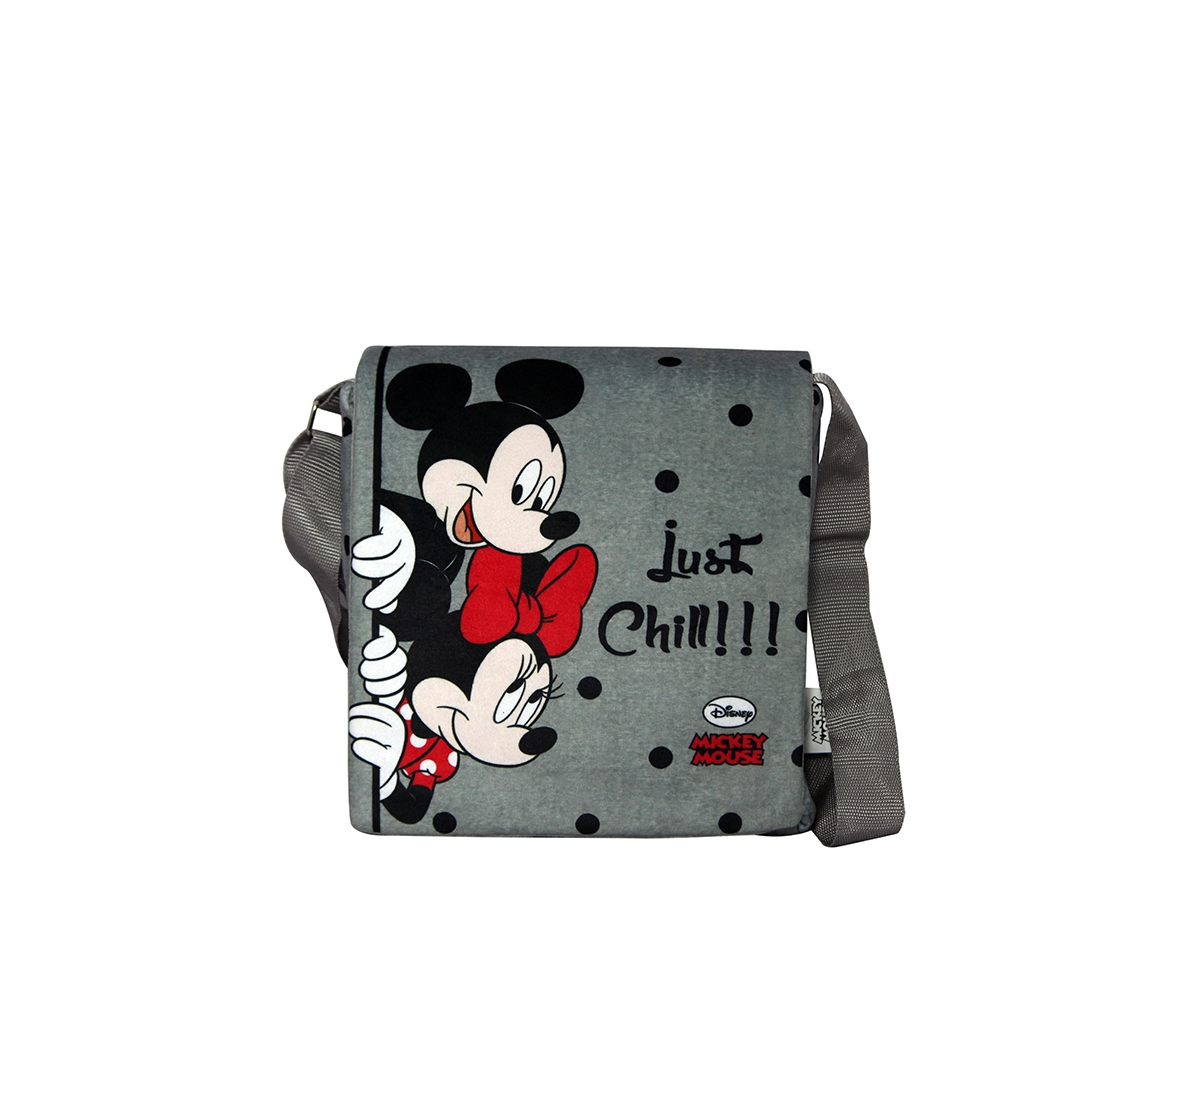 DISNEY | Disney Happiness Unisex Zipper Closure Mickey Mouse Printed Sling Bag_Grey_Free Size Plush Accessories for Kids age 12M+ - 27.94 Cm  1